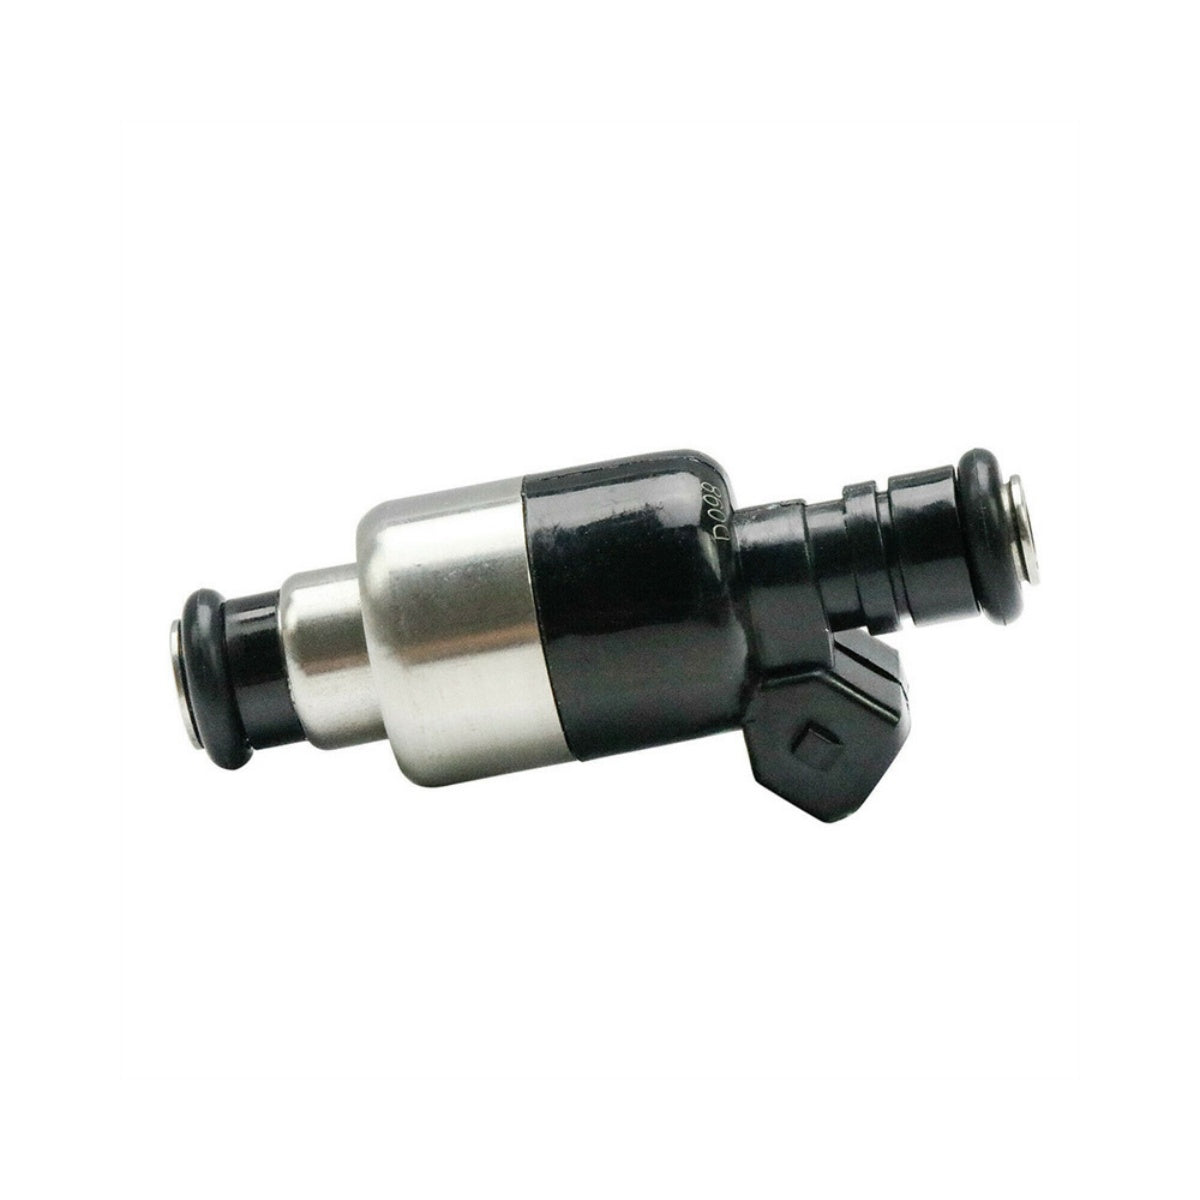 Fuel Injector 25180245 802632T, Fuel Injector for 1998-2001 Mercruiser, Daysyore Fuel Injector, Car Fuel Injector, Auto Fuel Injector